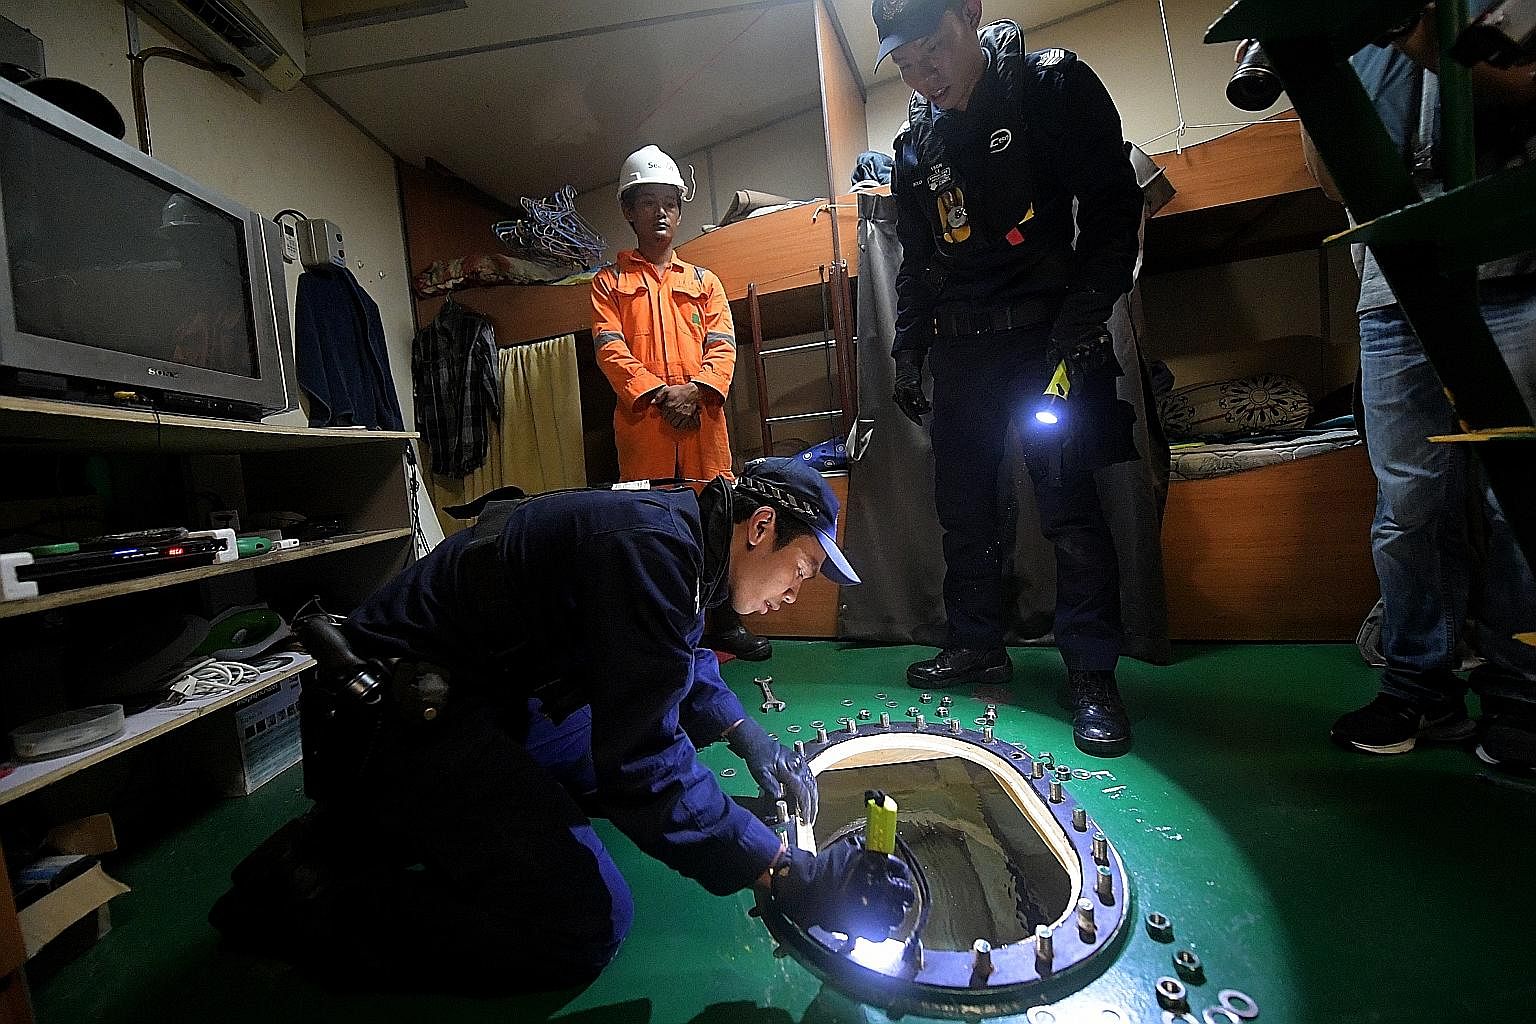 Police Coast Guard Anti-Smuggling Team officers inspecting a water tank for contraband or weapons during a surprise check on a vessel on Wednesday.